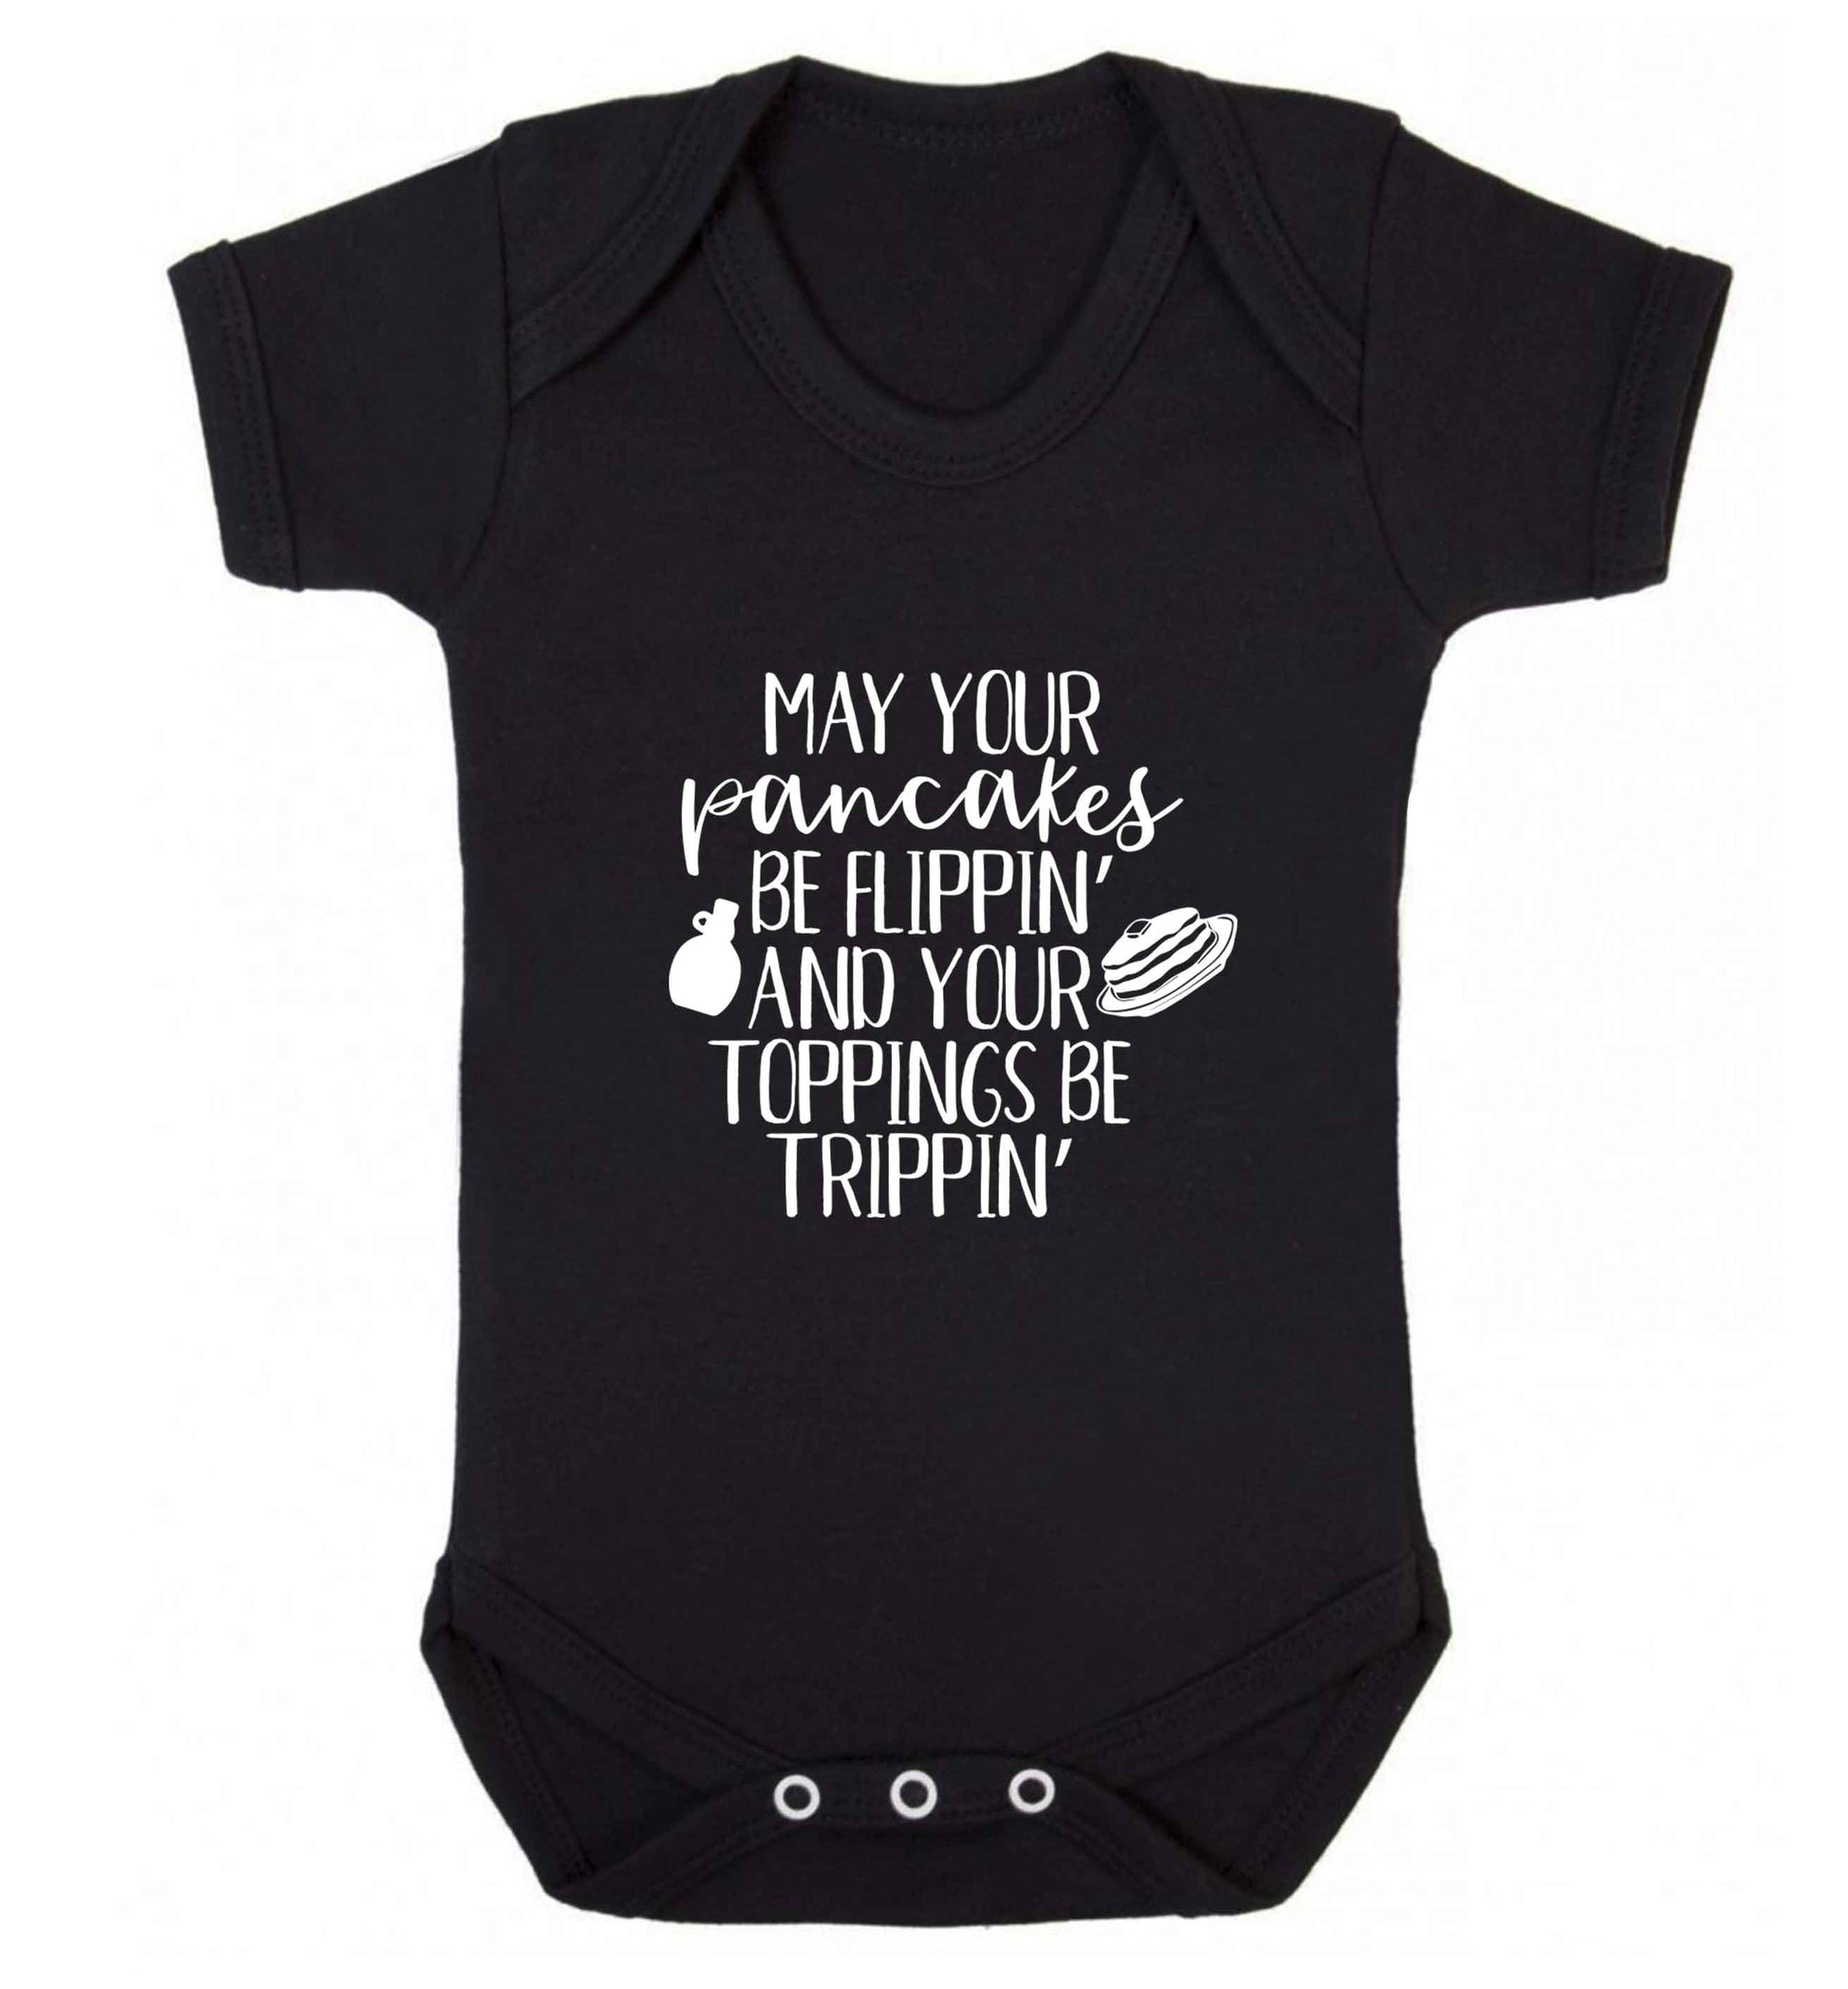 May your pancakes be flippin' and your toppings be trippin' baby vest black 18-24 months